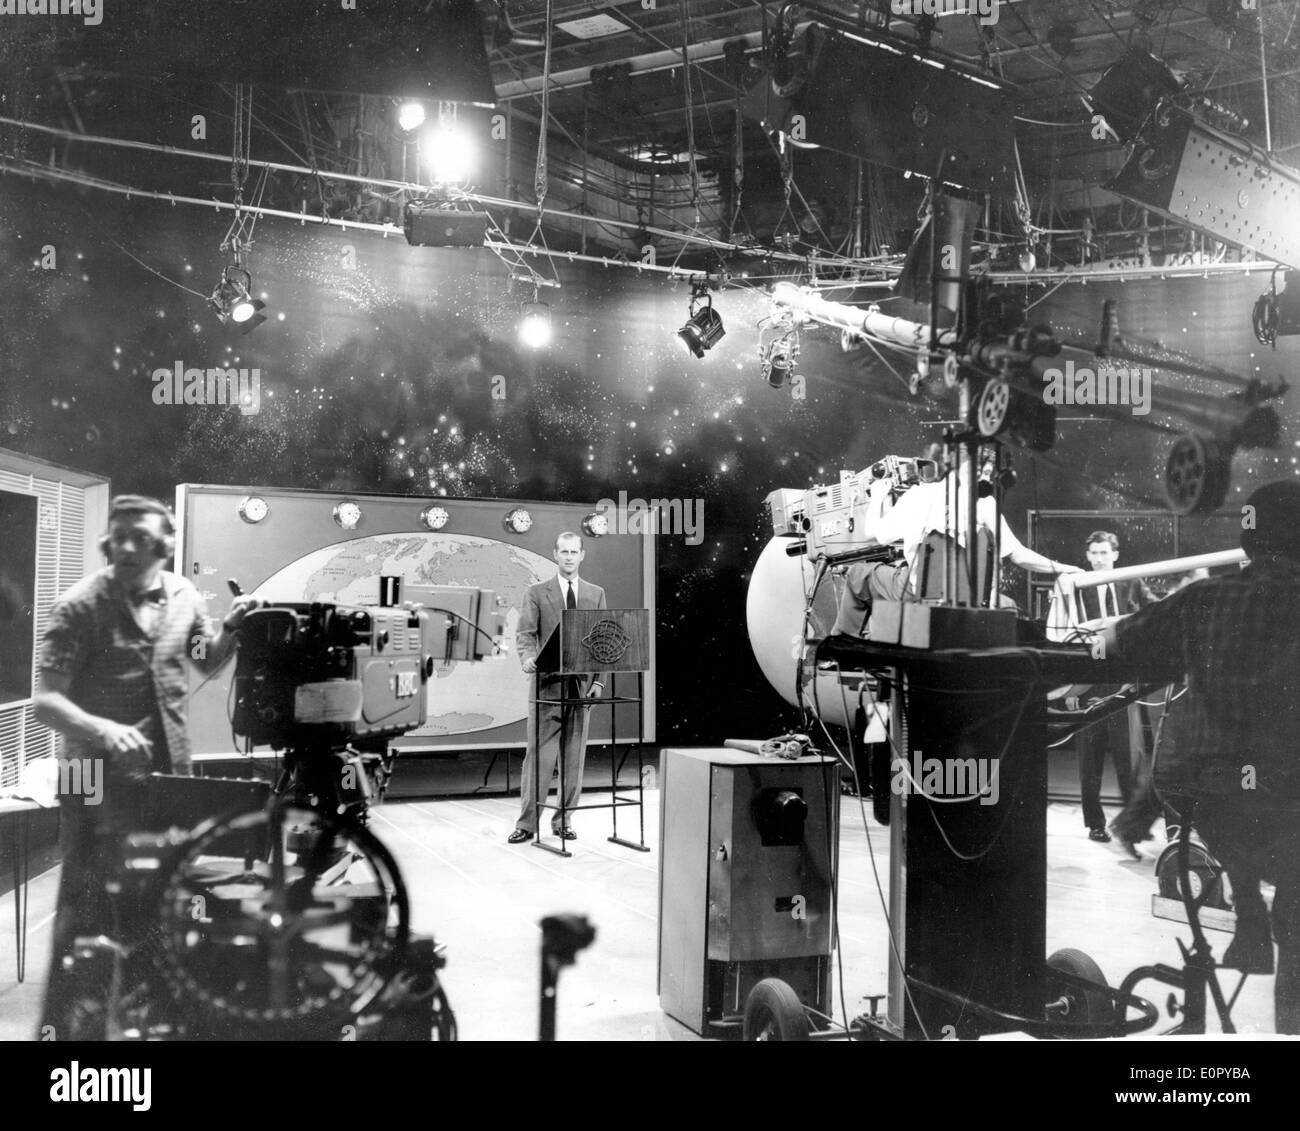 Prince Philip films TV special at Lime Grove Studios Stock Photo